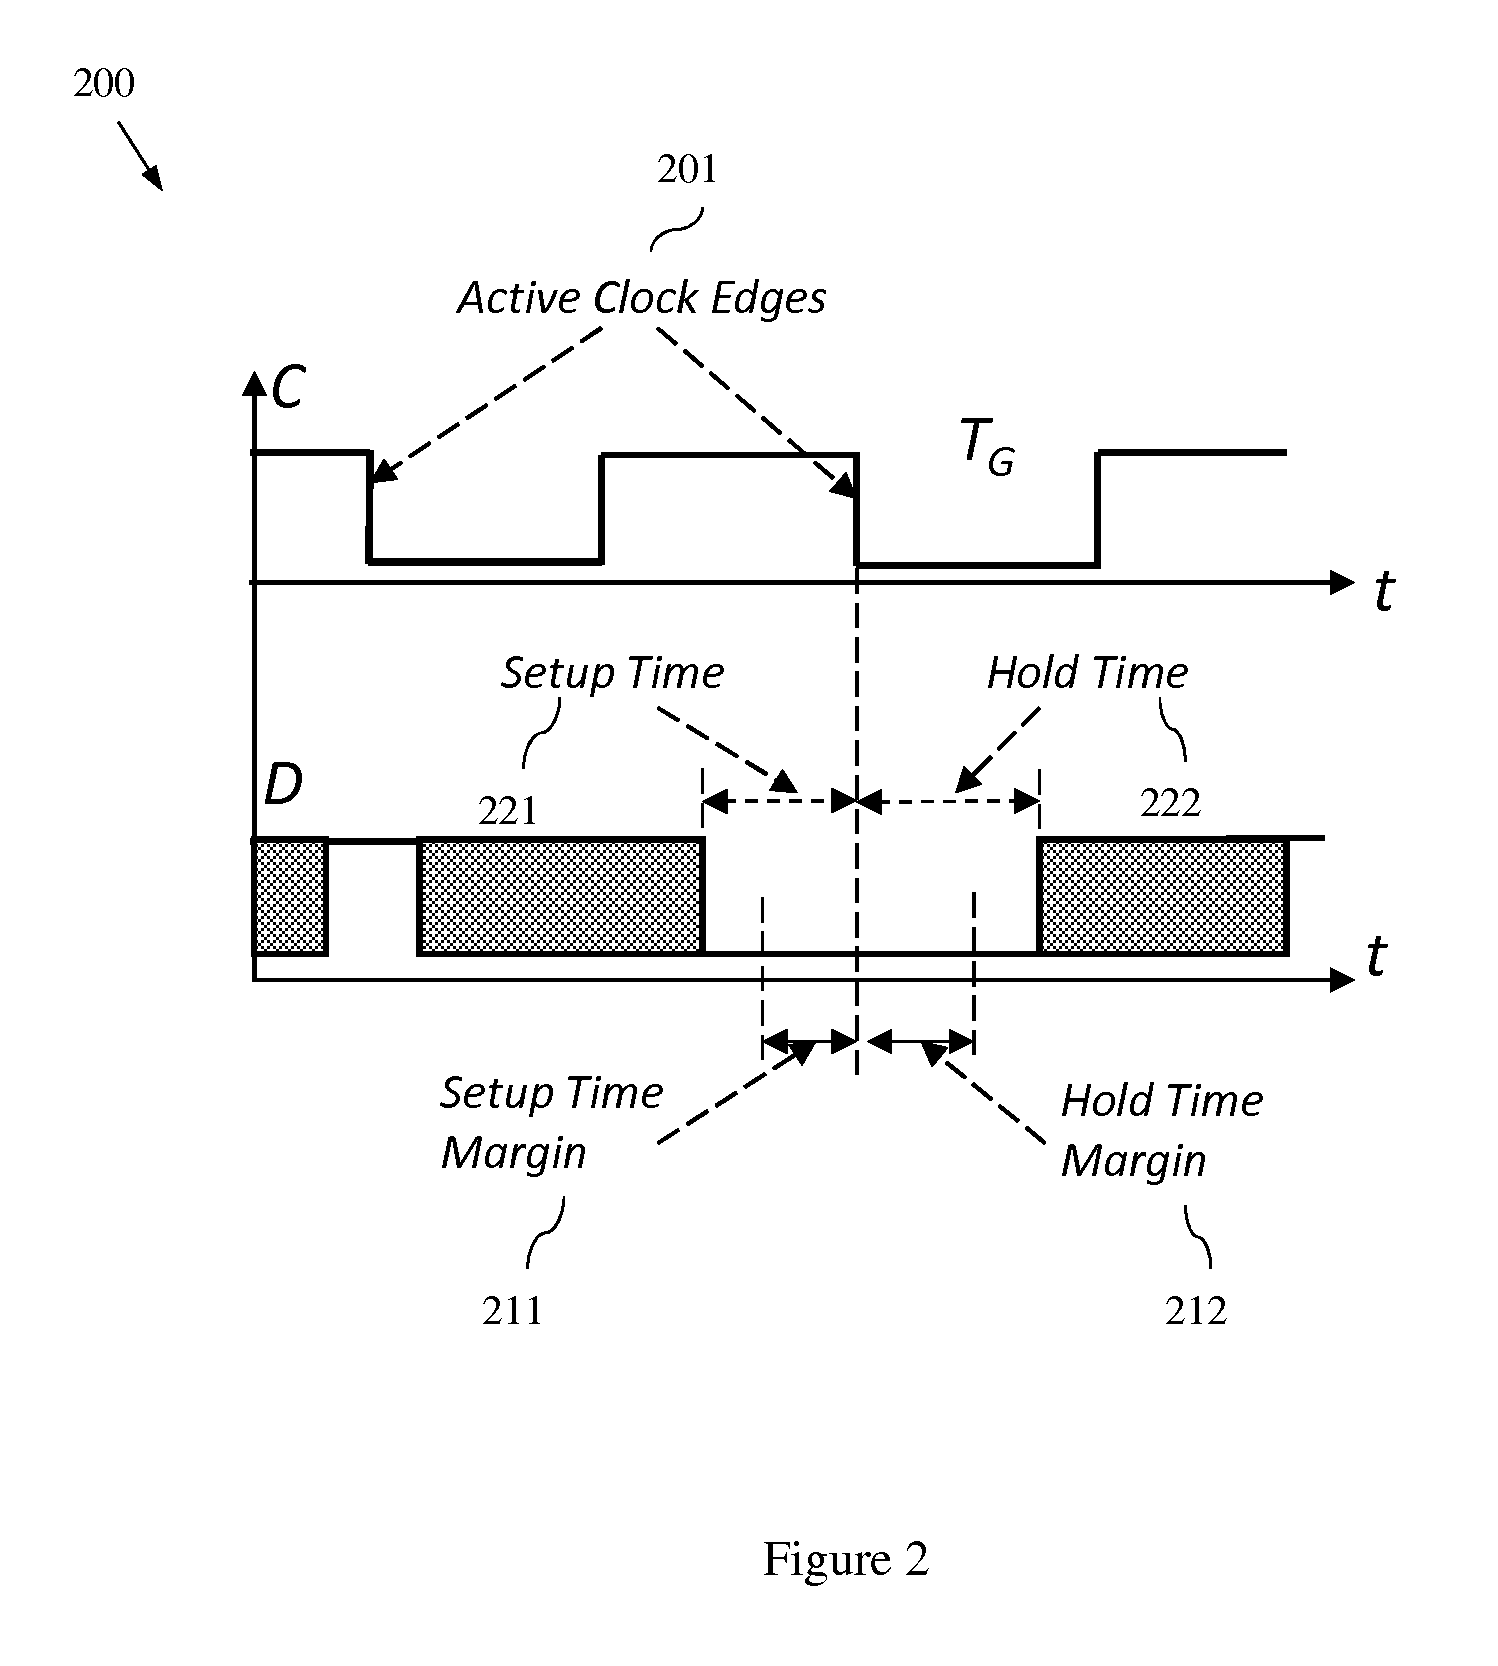 Method, system and program storage device for performing a parameterized statistical static timing analysis (SSTA) of an integrated circuit taking into account setup and hold margin interdependence